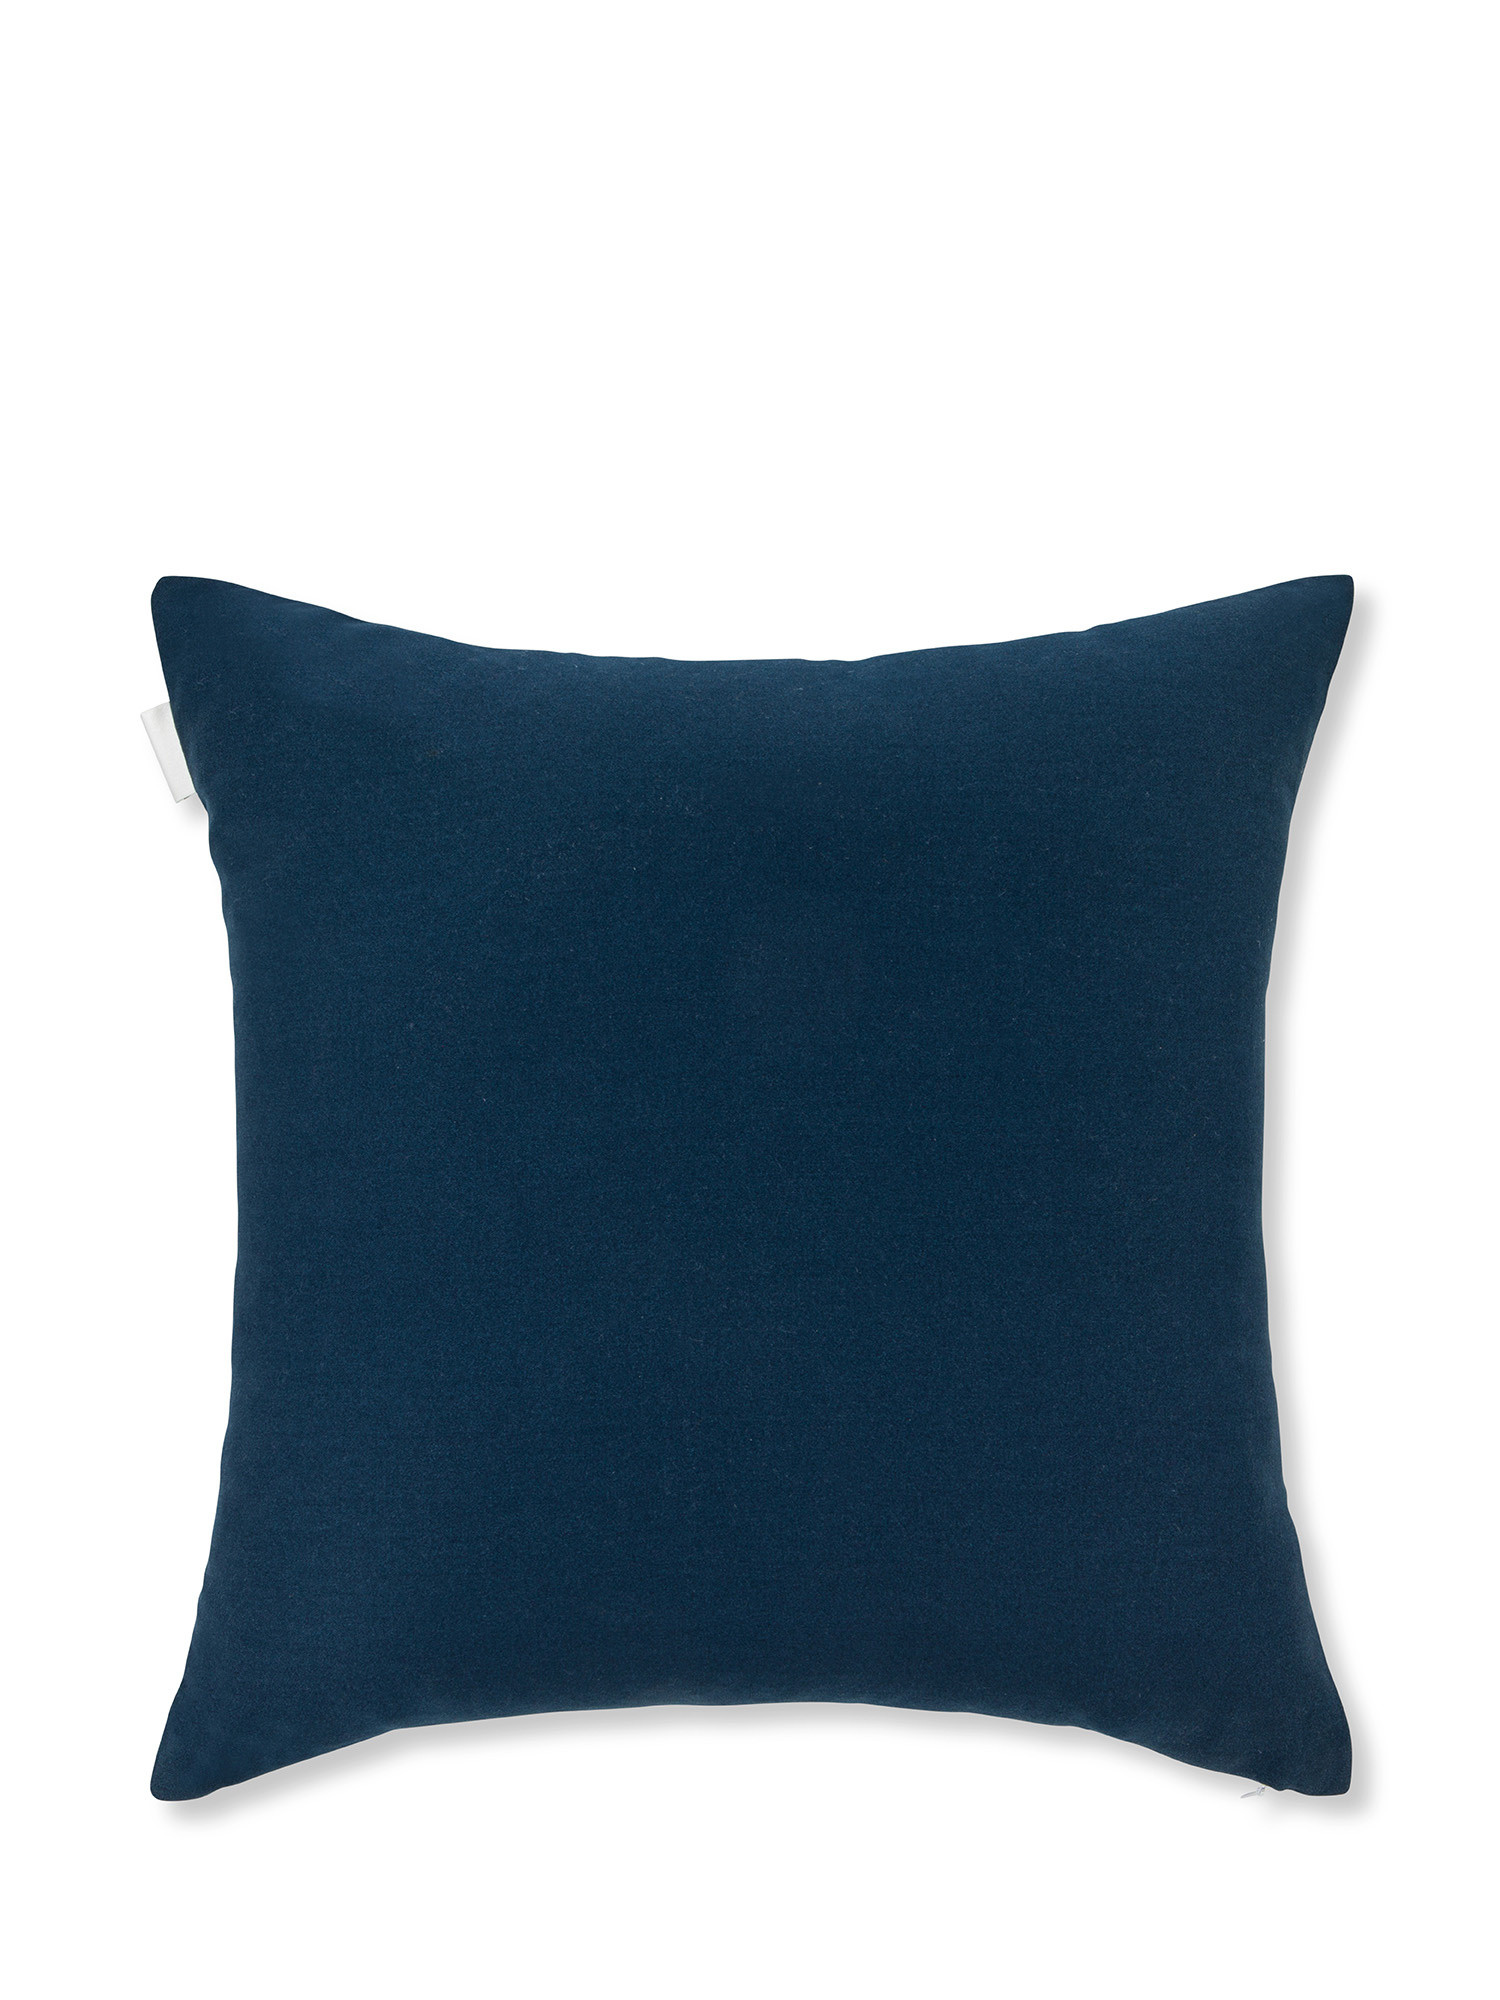 Cotton twill cushion with stitching 45x45cm, Dark Blue, large image number 1